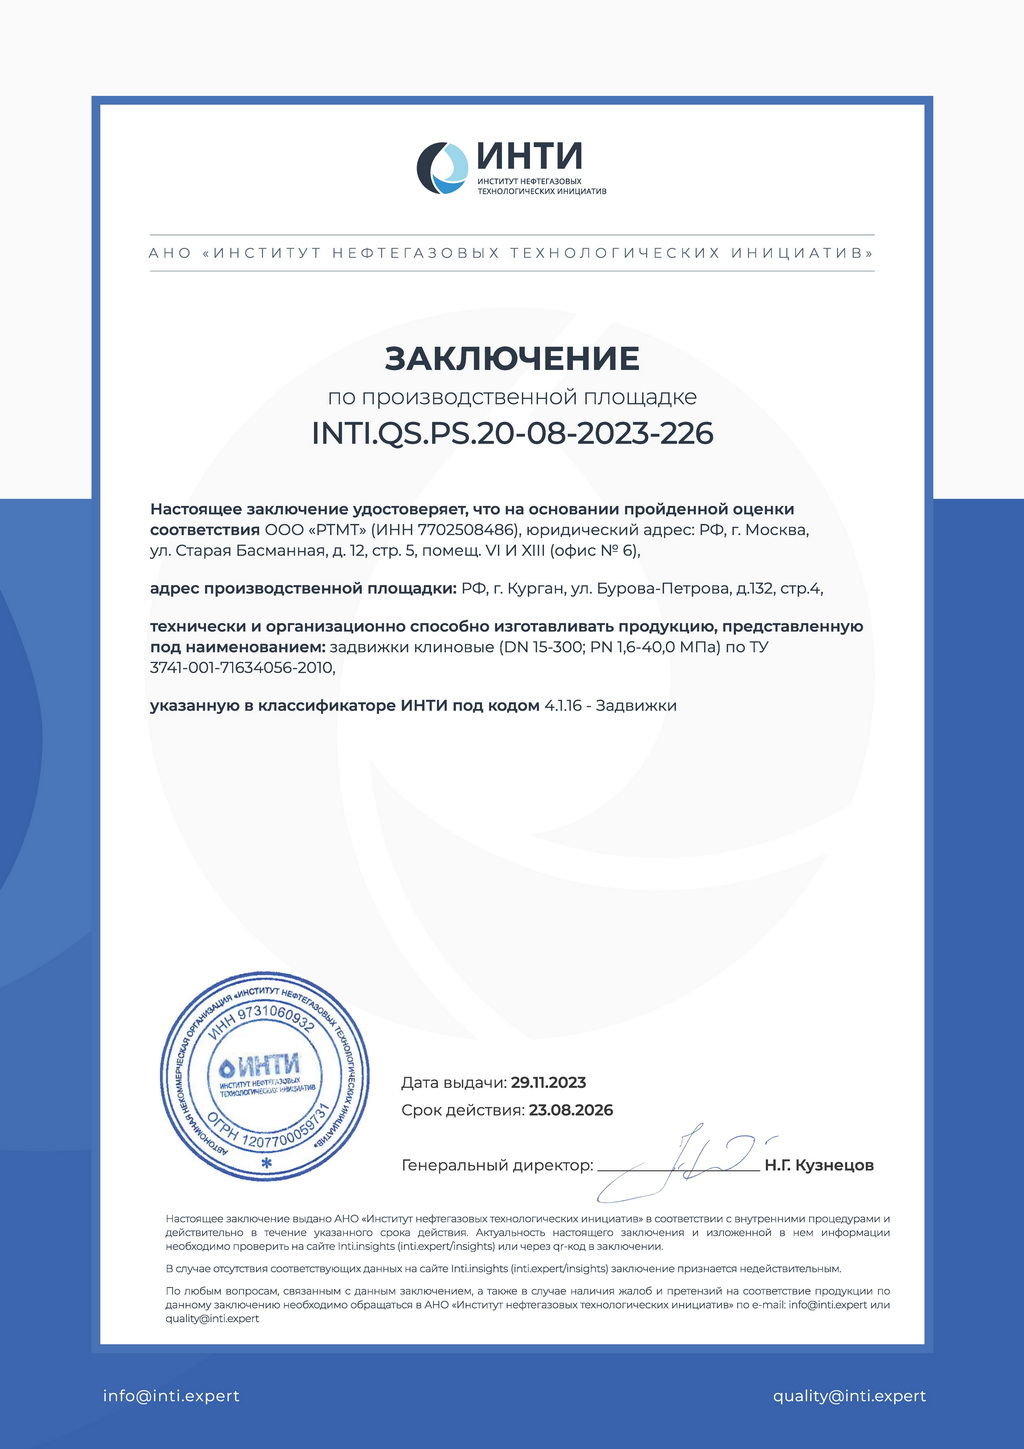 Successful completion of the evaluation of ANO "INTI"